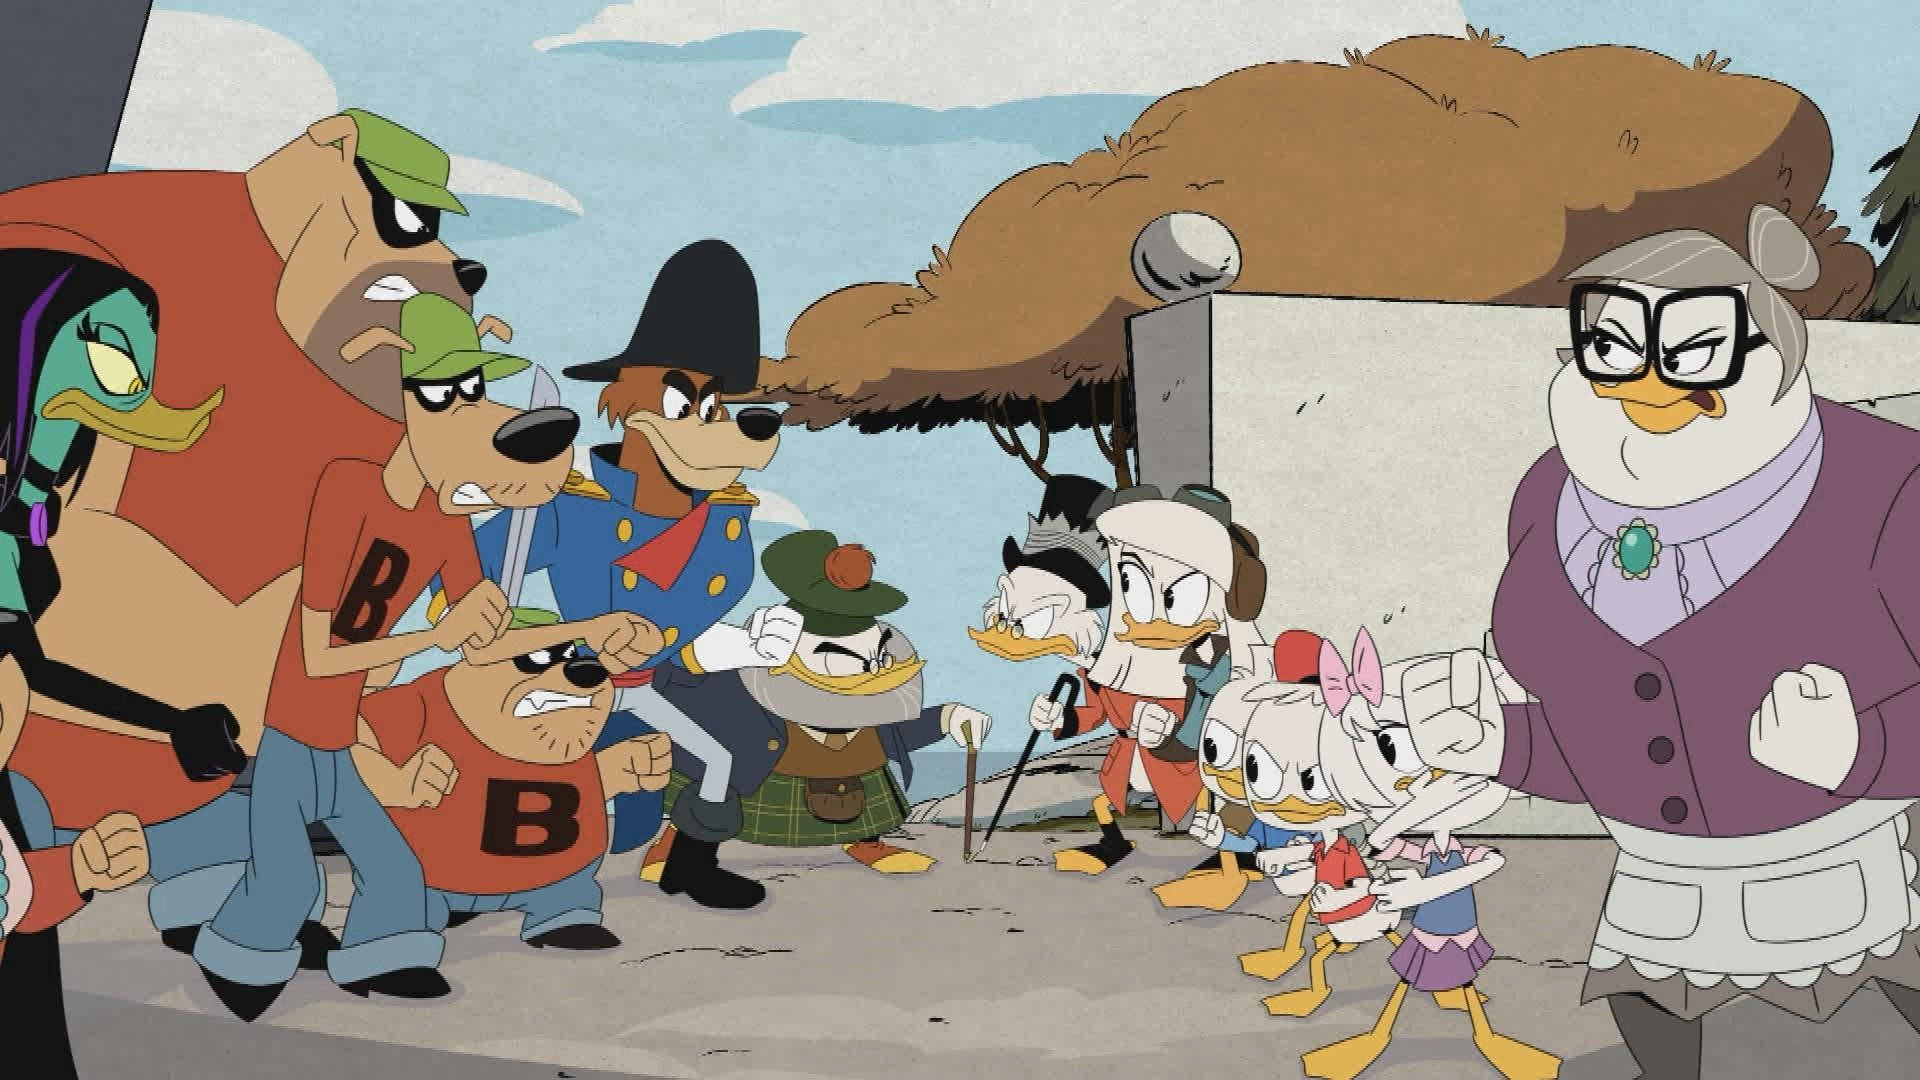 An Exciting Adventure Awaits - Ducktales Season 2 Background